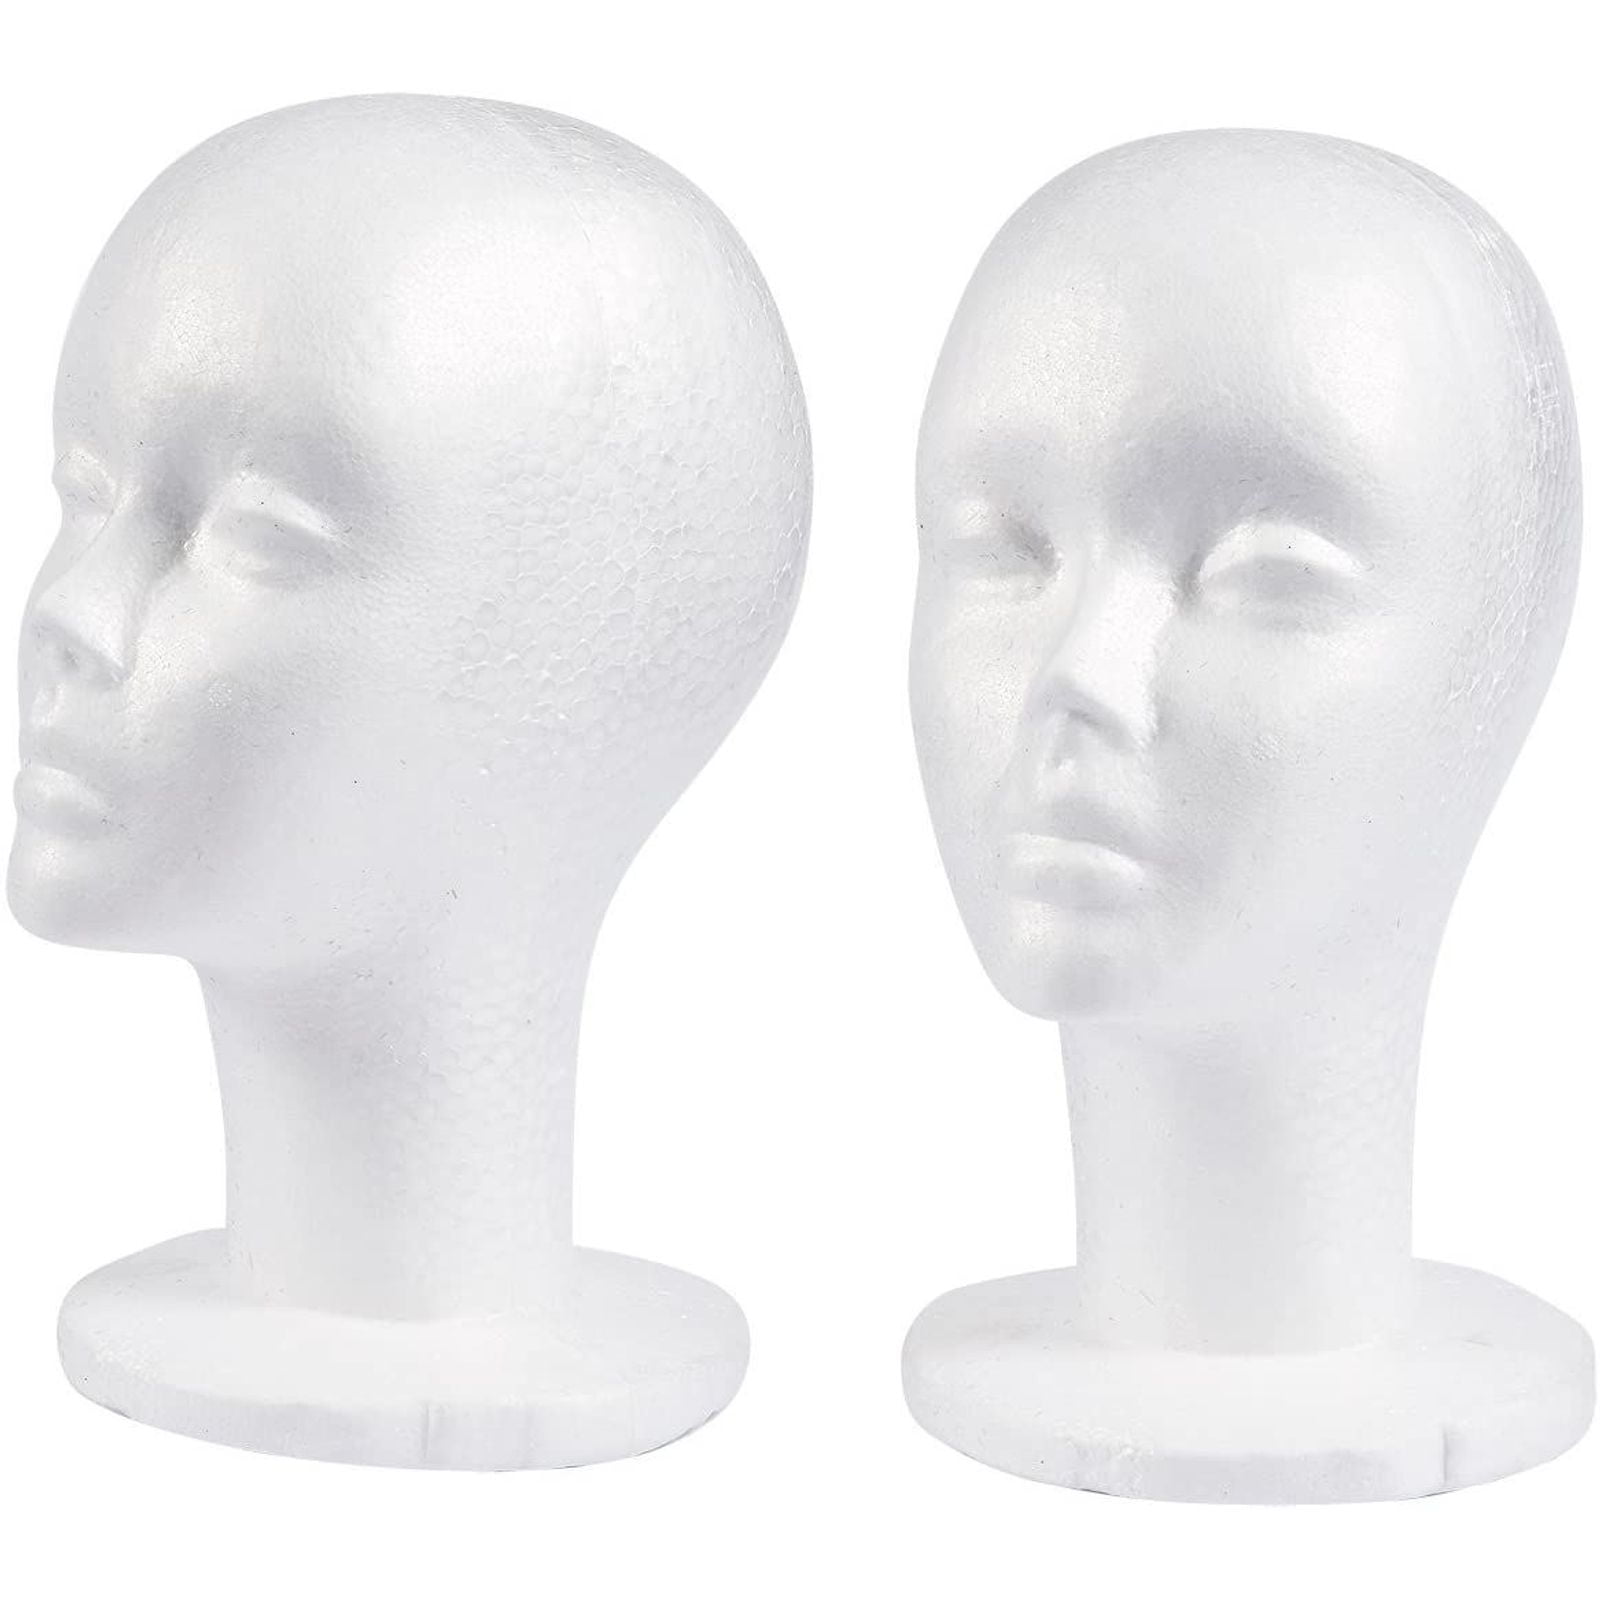 10 x Wig Display Stand Mannequin Dummy Head Hat Cap Hair Holder Foldable Stable 